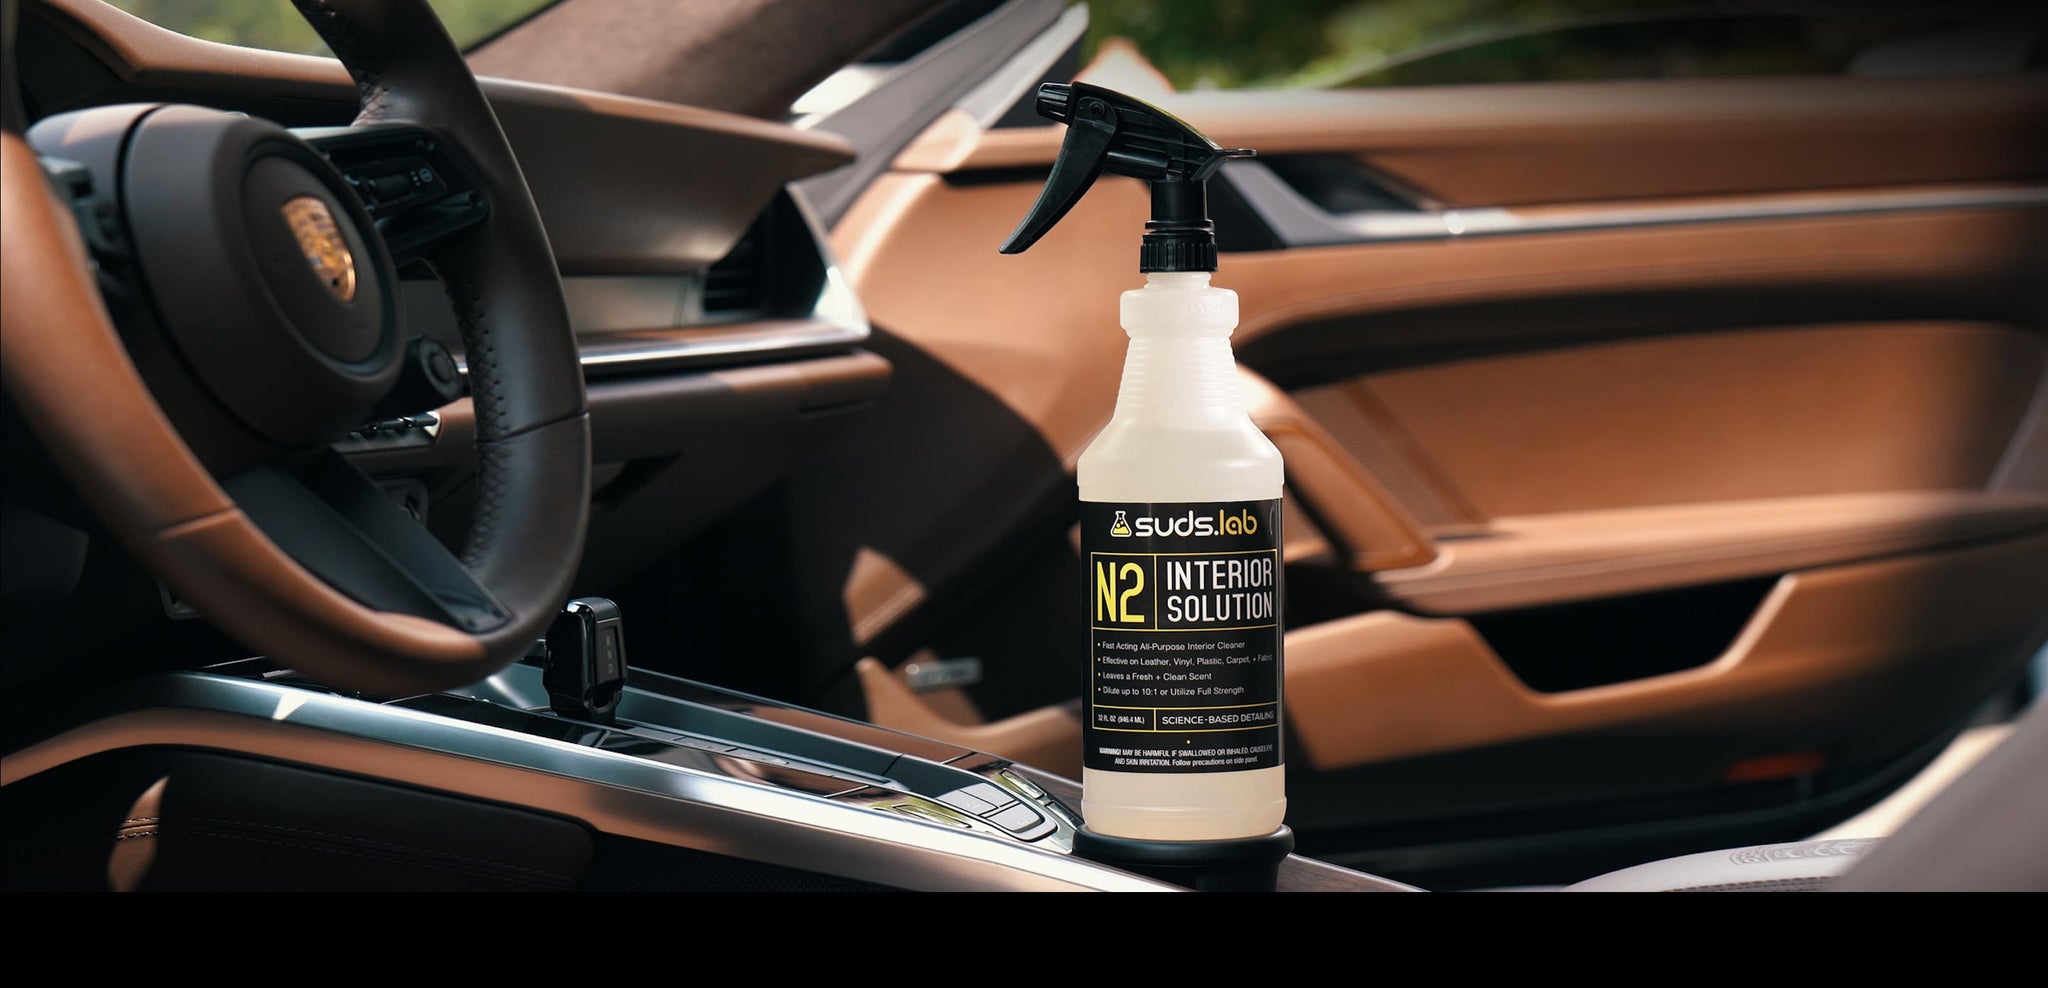  Suds Lab CP Ceramic Protective Wash, Hydrophobic Finish Car  Wash Soap, Water Activated Easy To Use Water and Dirt Repelling Cleaner And  Finish Treatment, High Gloss Spot Free Shine 32 oz. 